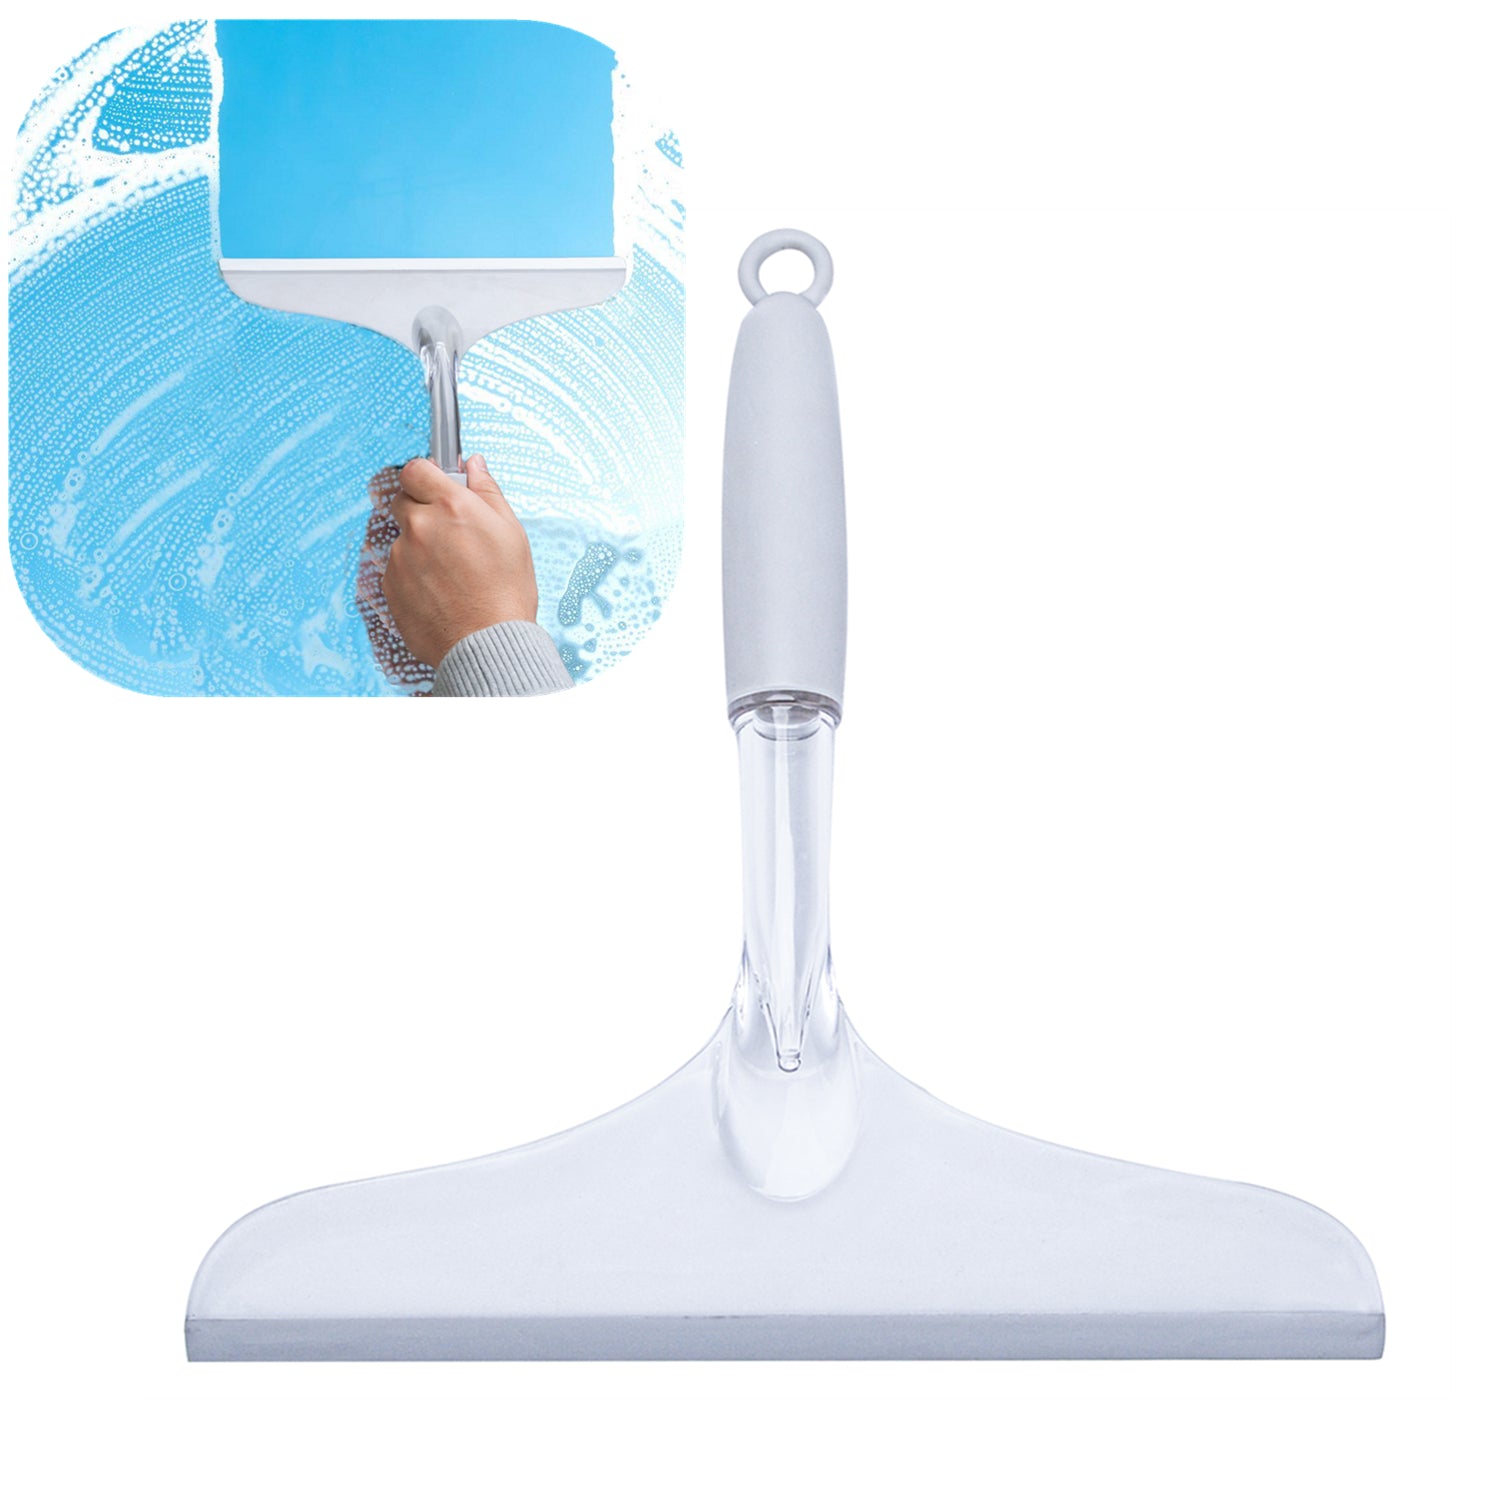 Shower Squeegee Cleaner Tool Long Handle Small Squeegee for Shower